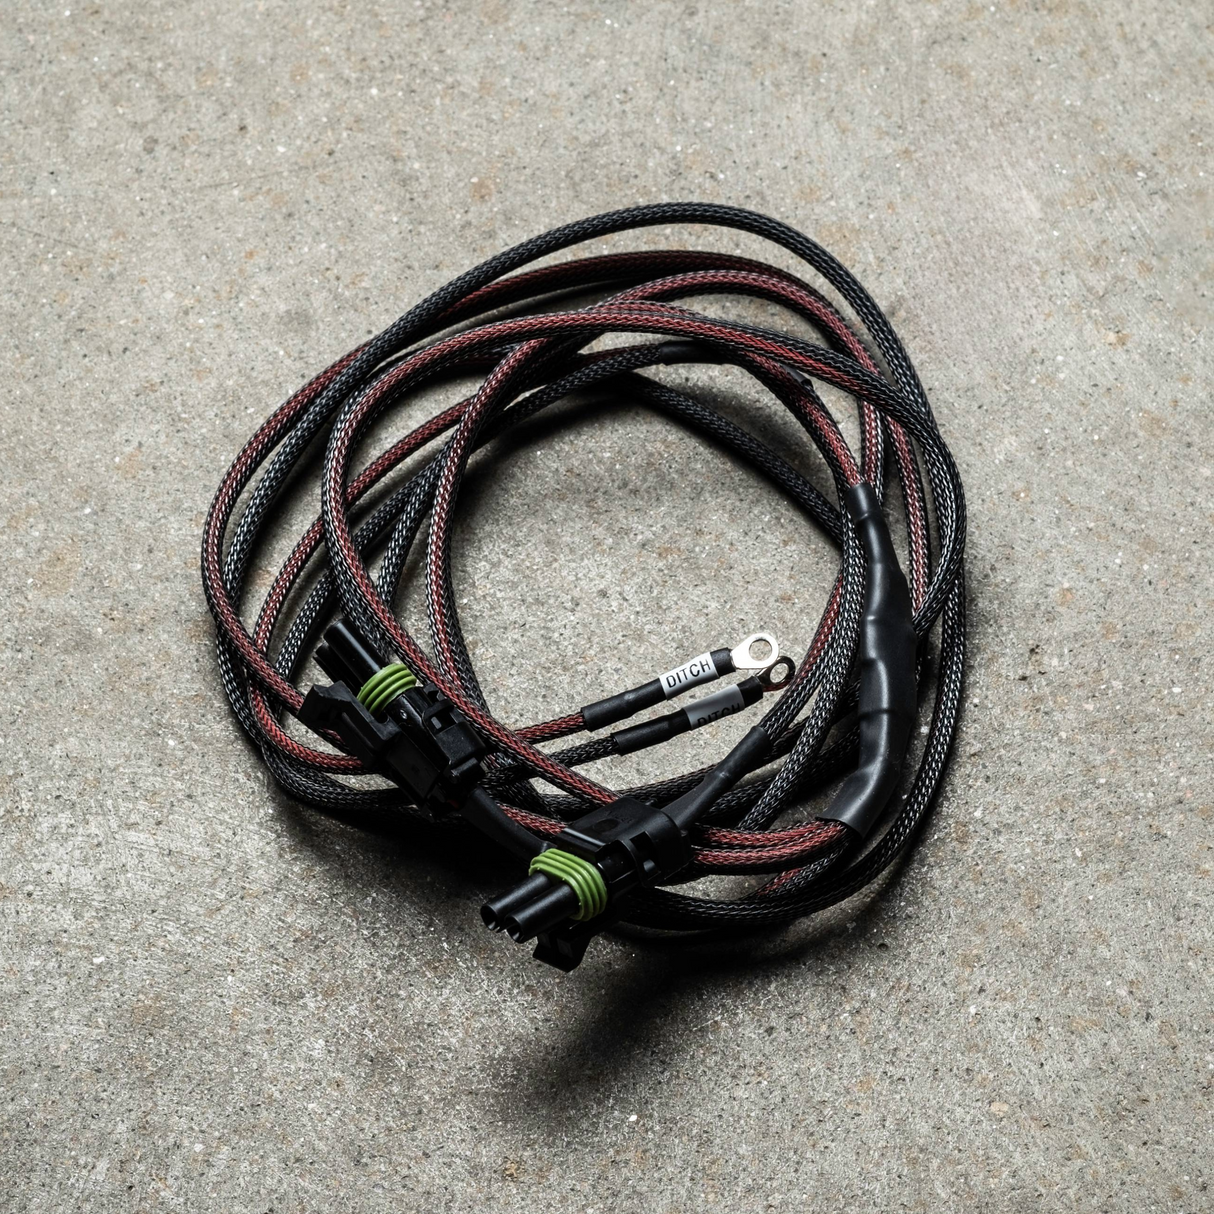 Mid-Size Vehicle Blaze Off-Road Pre-Made Wiring Harnesses - Blaze Off-Road